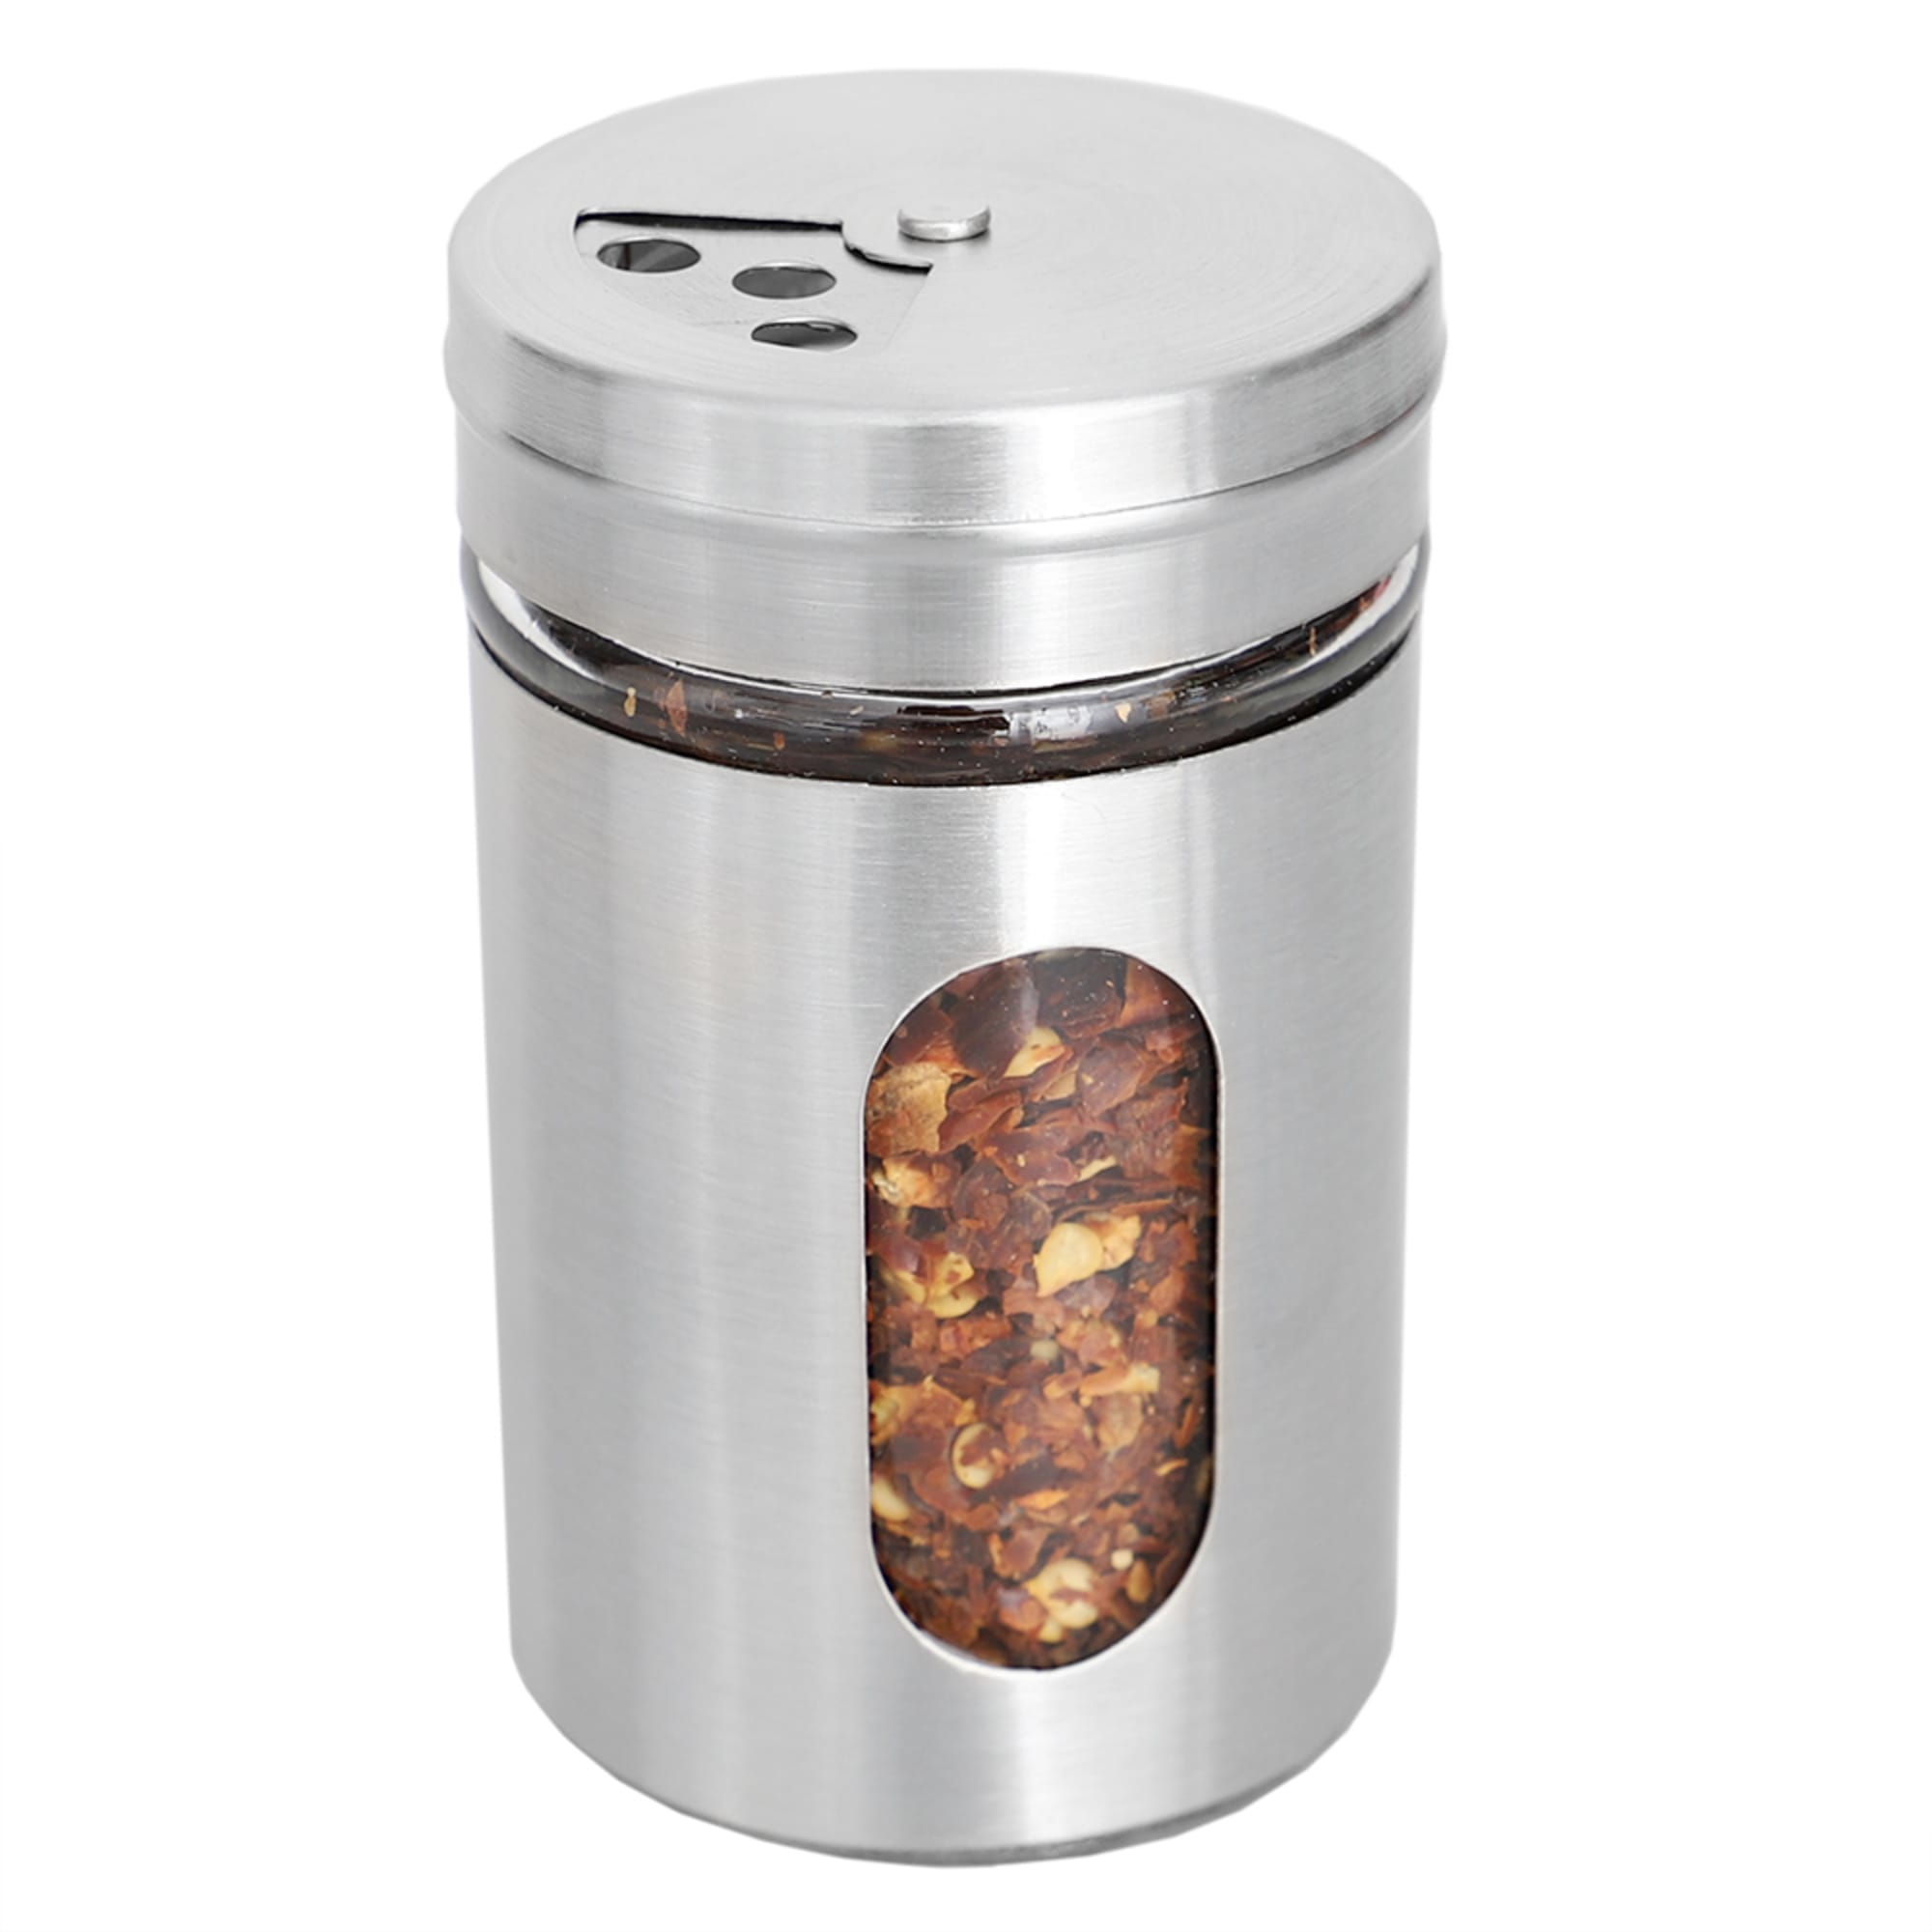 Home Basics 4 oz. Stainless Steel Shaker with Glass Window, Silver $1.25 EACH, CASE PACK OF 48